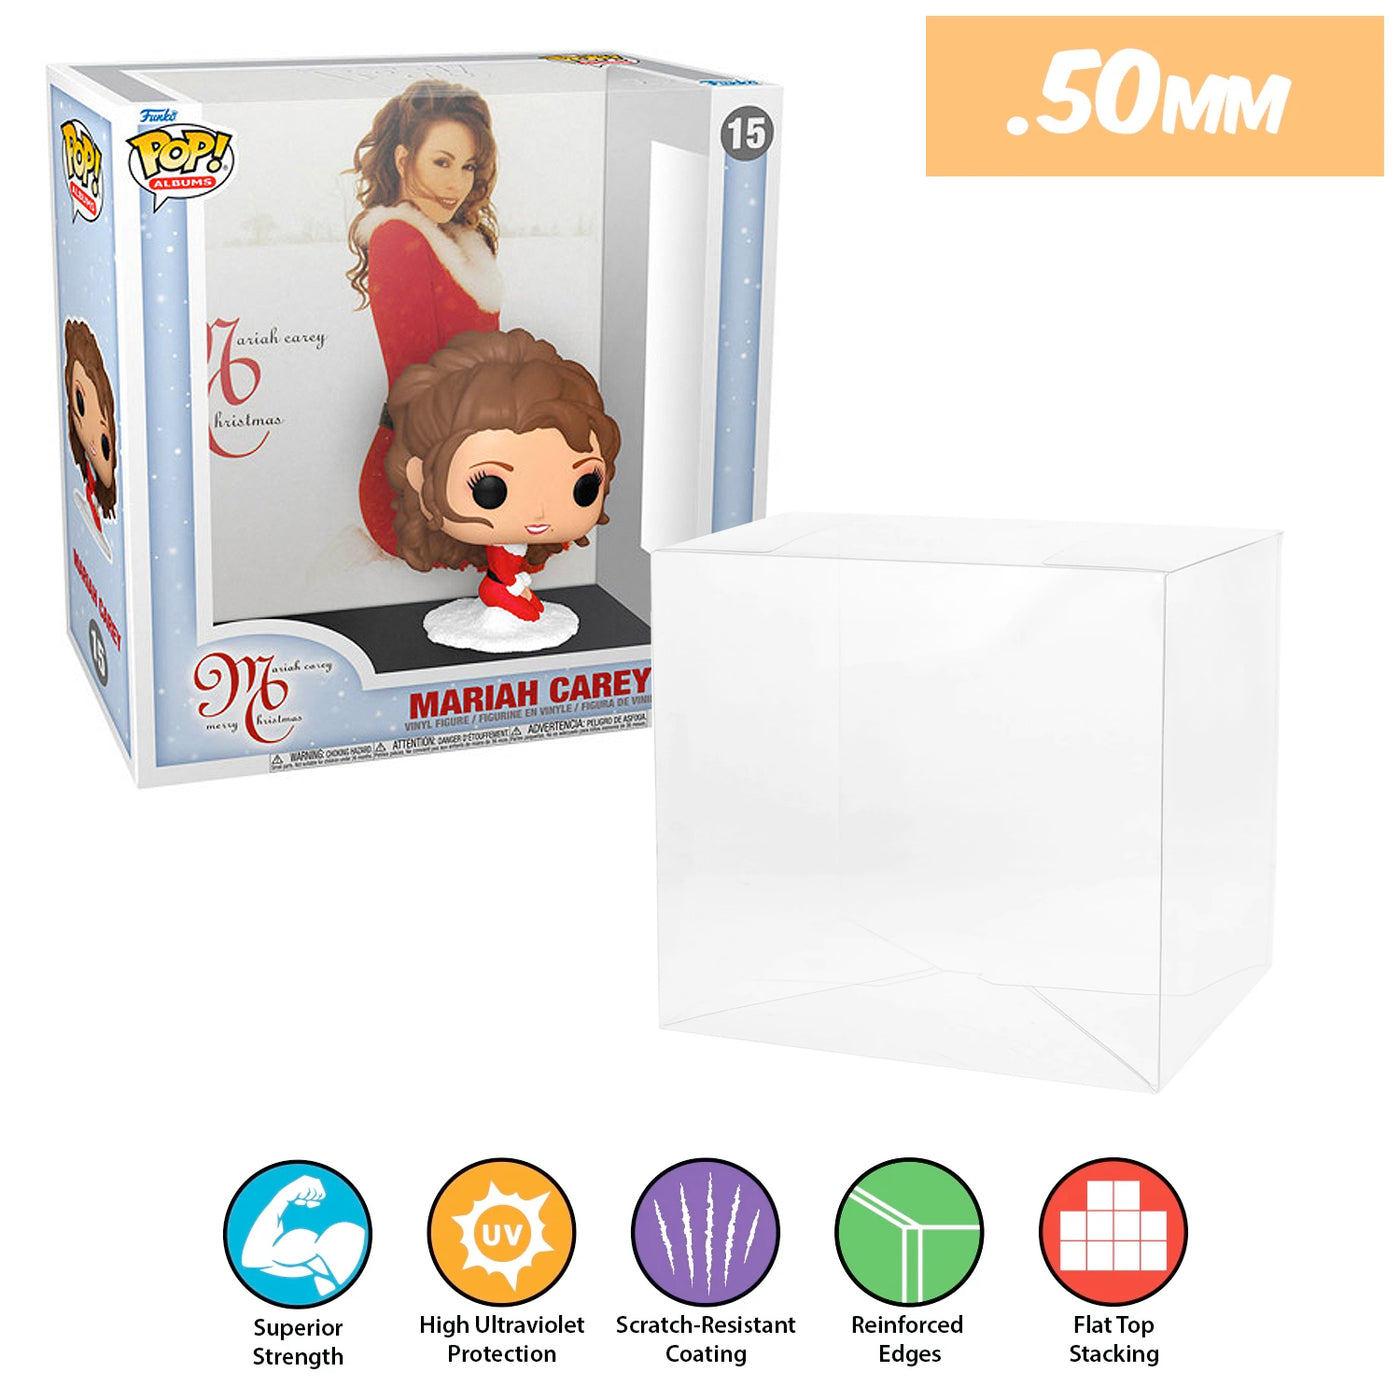 15 mariah carey merry christmas pop albums best funko pop protectors thick strong uv scratch flat top stack vinyl display geek plastic shield vaulted eco armor fits collect protect display case kollector protector